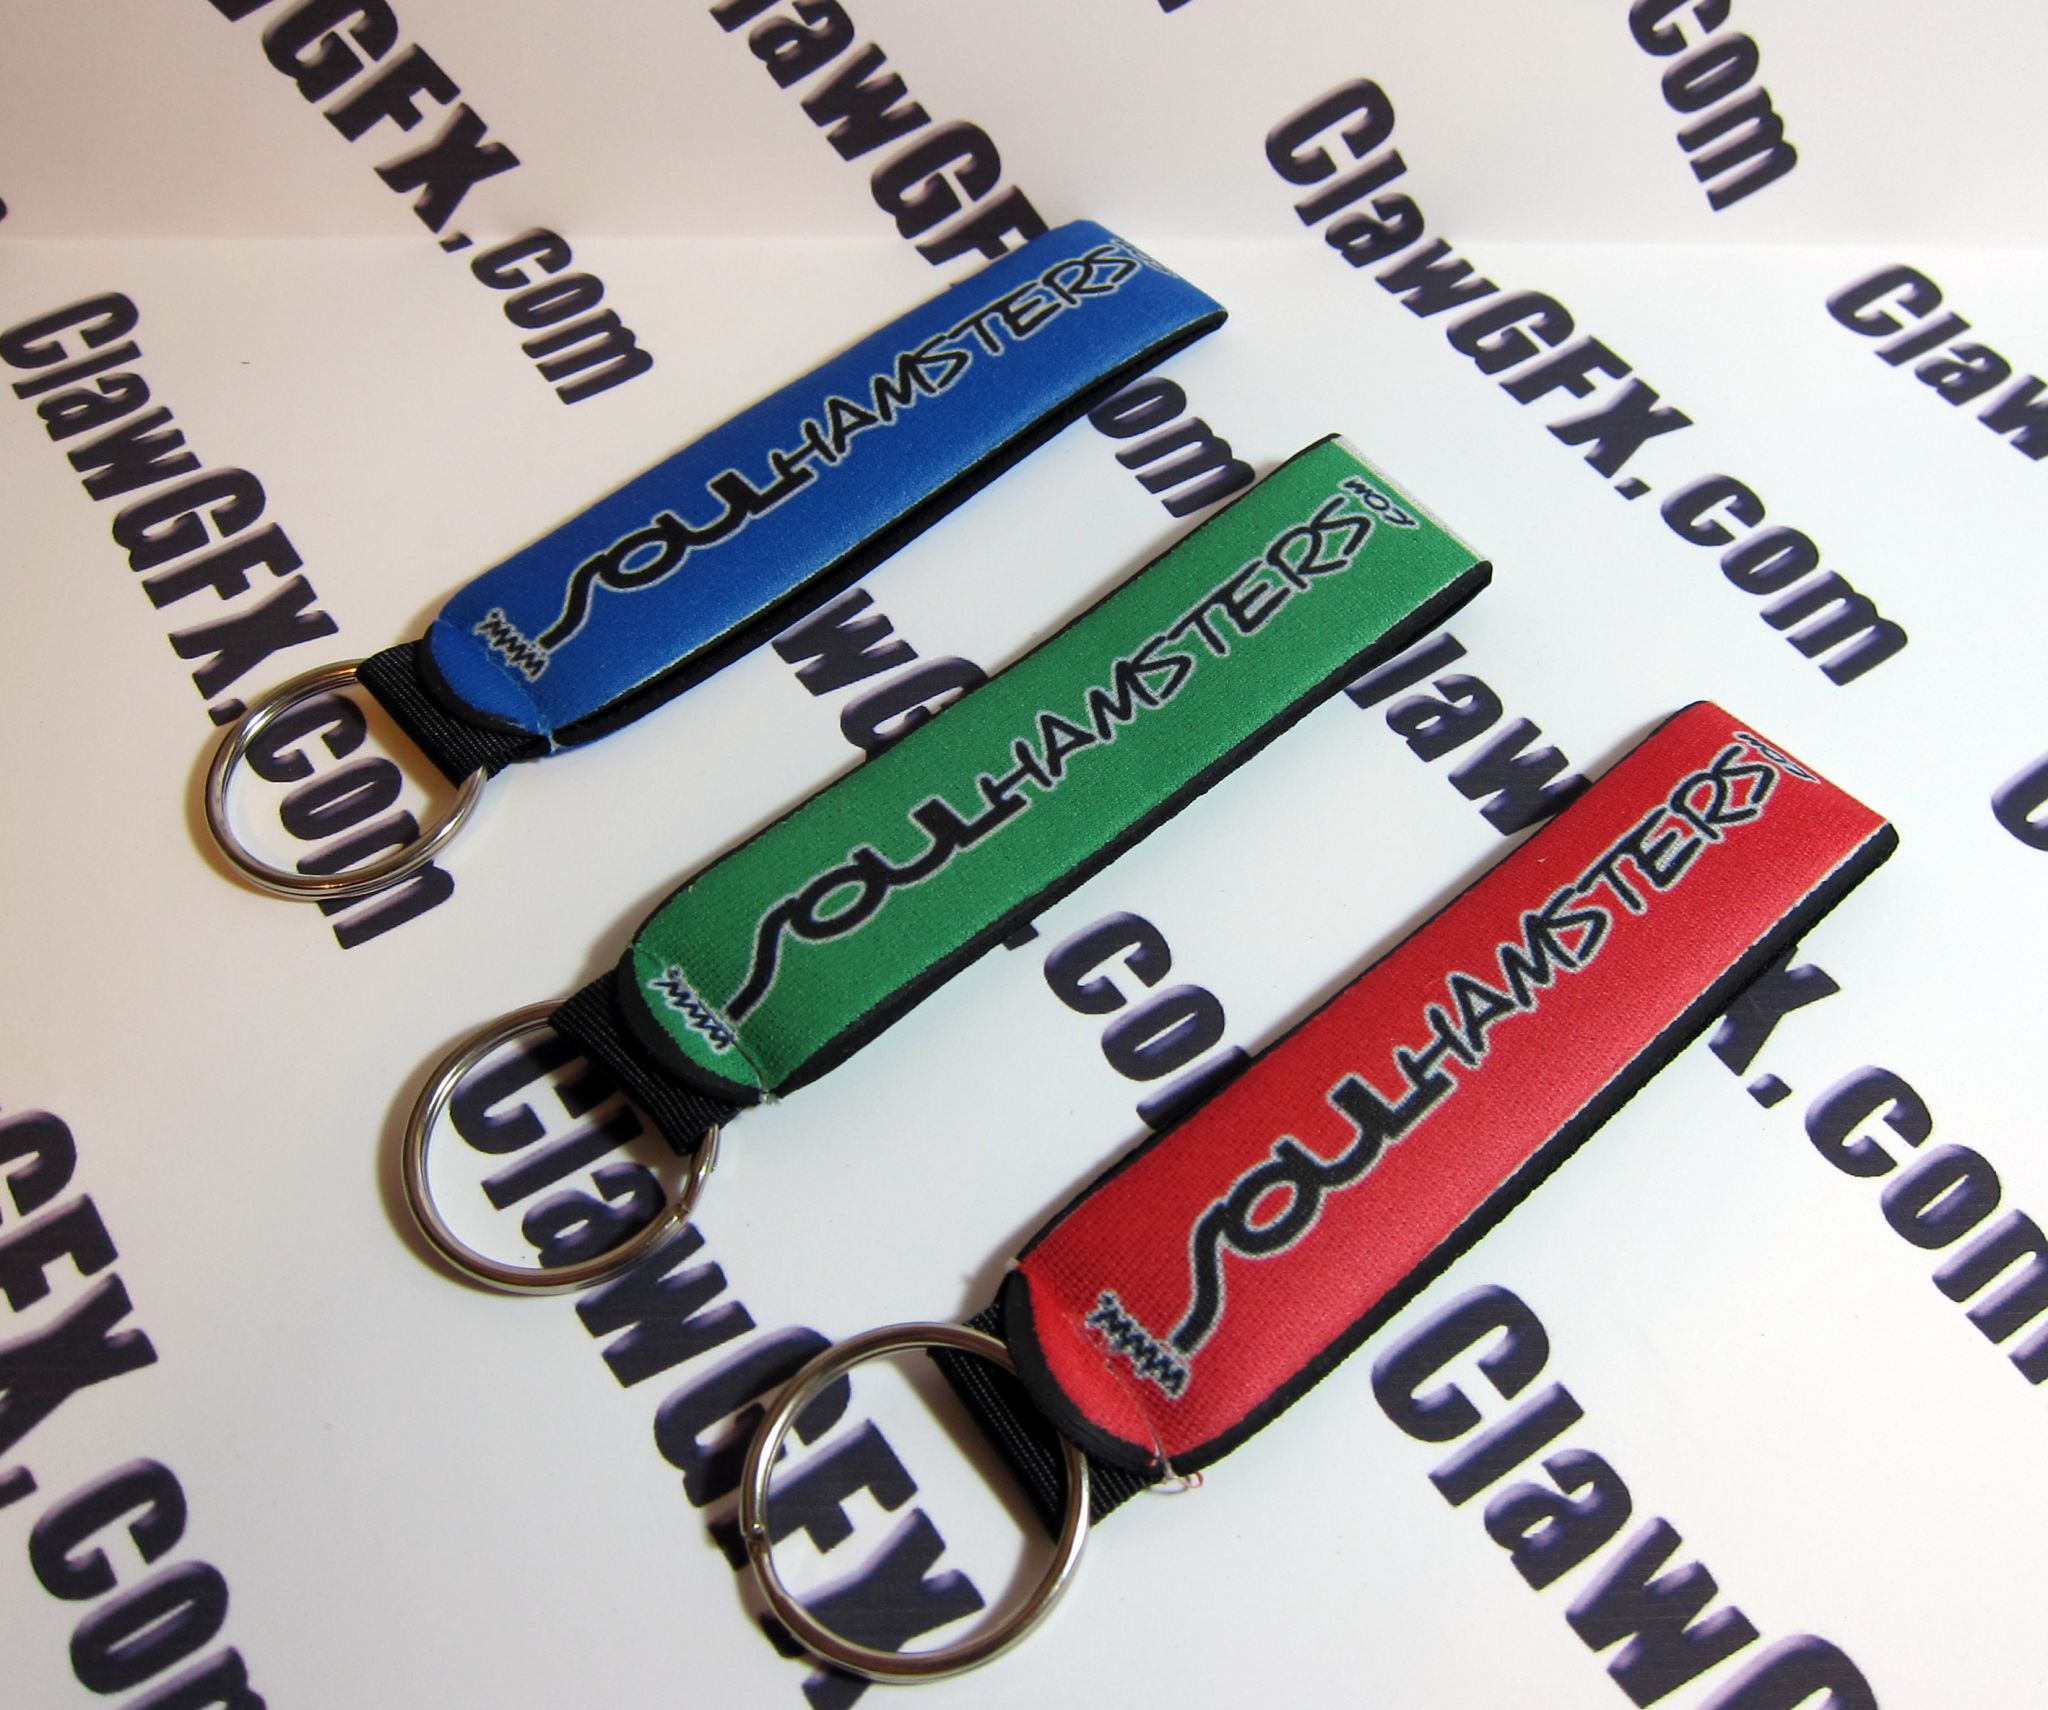 Soulhamster.com KeyFobs made with sublimation printing